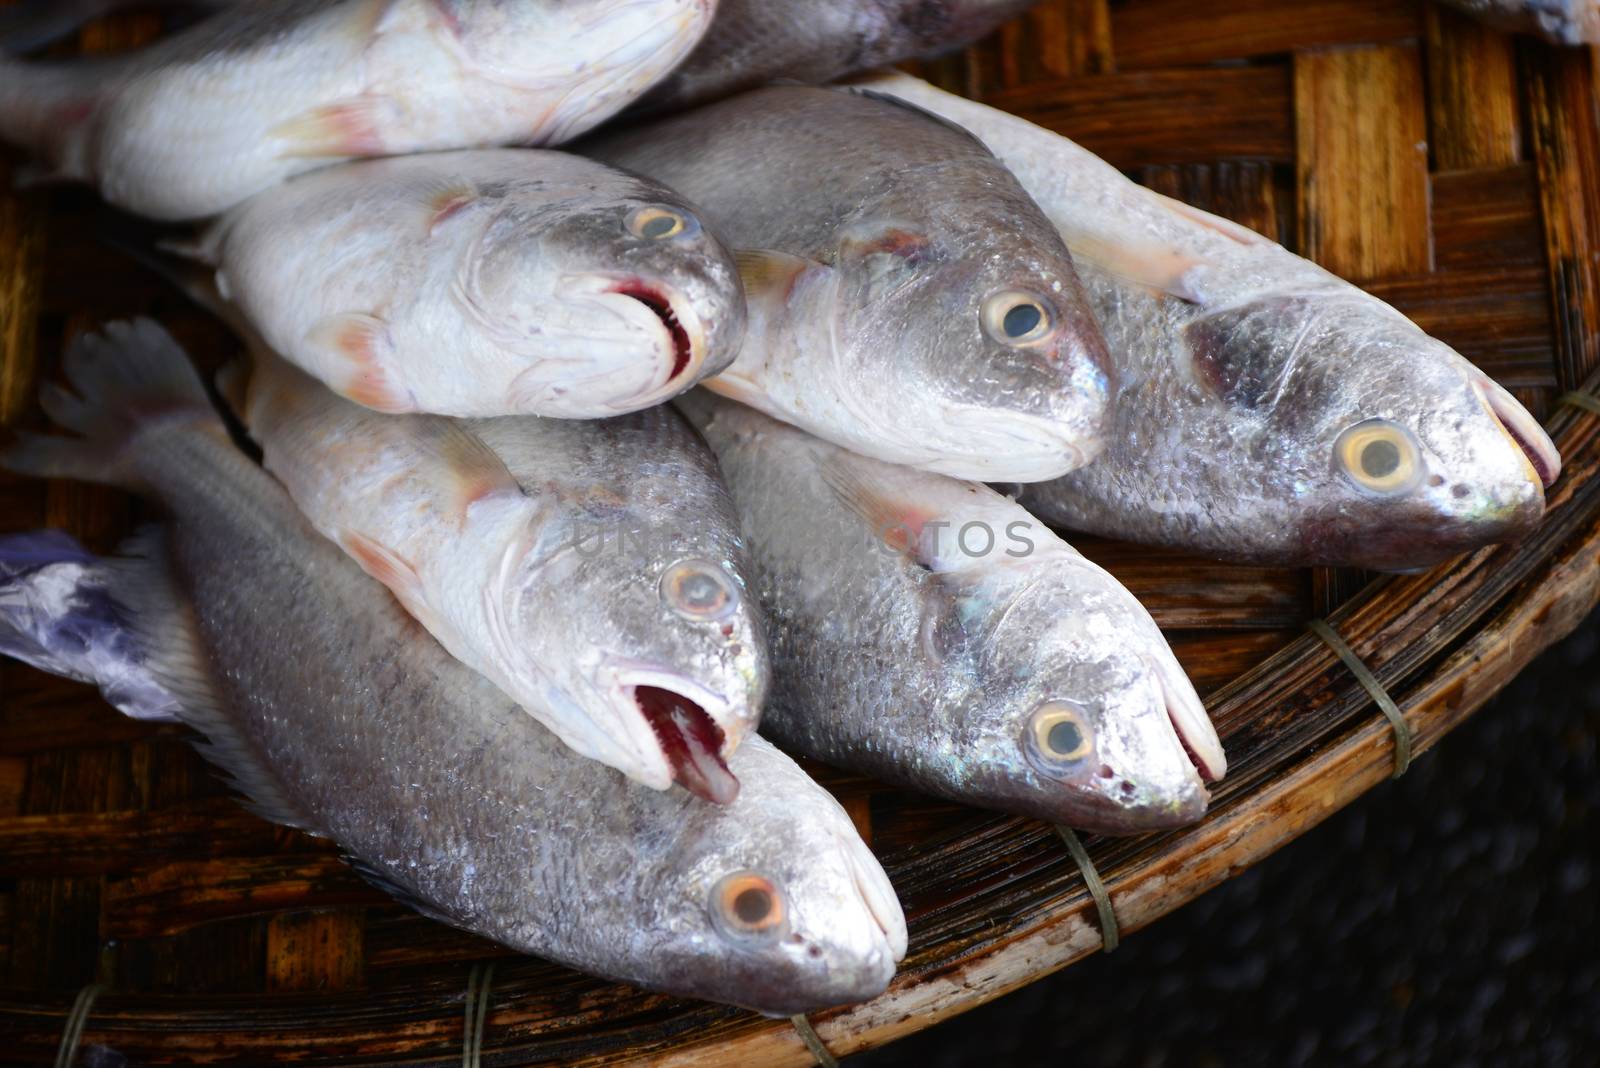 croaker fish Sell in fresh seafood market, note  select focus with shallow depth of field